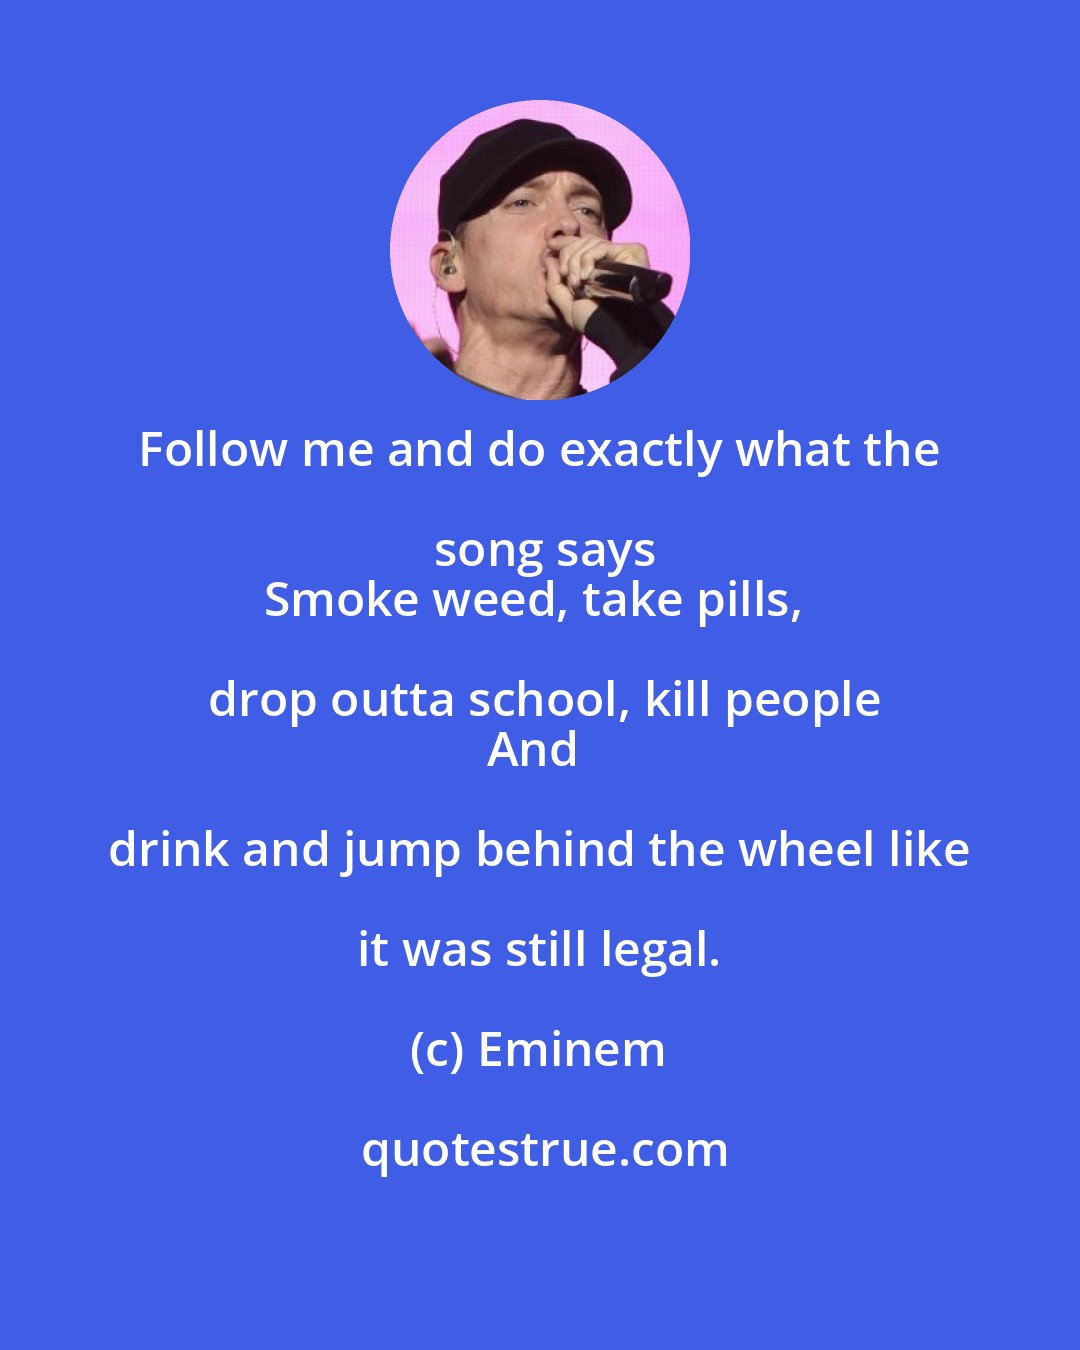 Eminem: Follow me and do exactly what the song says
Smoke weed, take pills, drop outta school, kill people
And drink and jump behind the wheel like it was still legal.